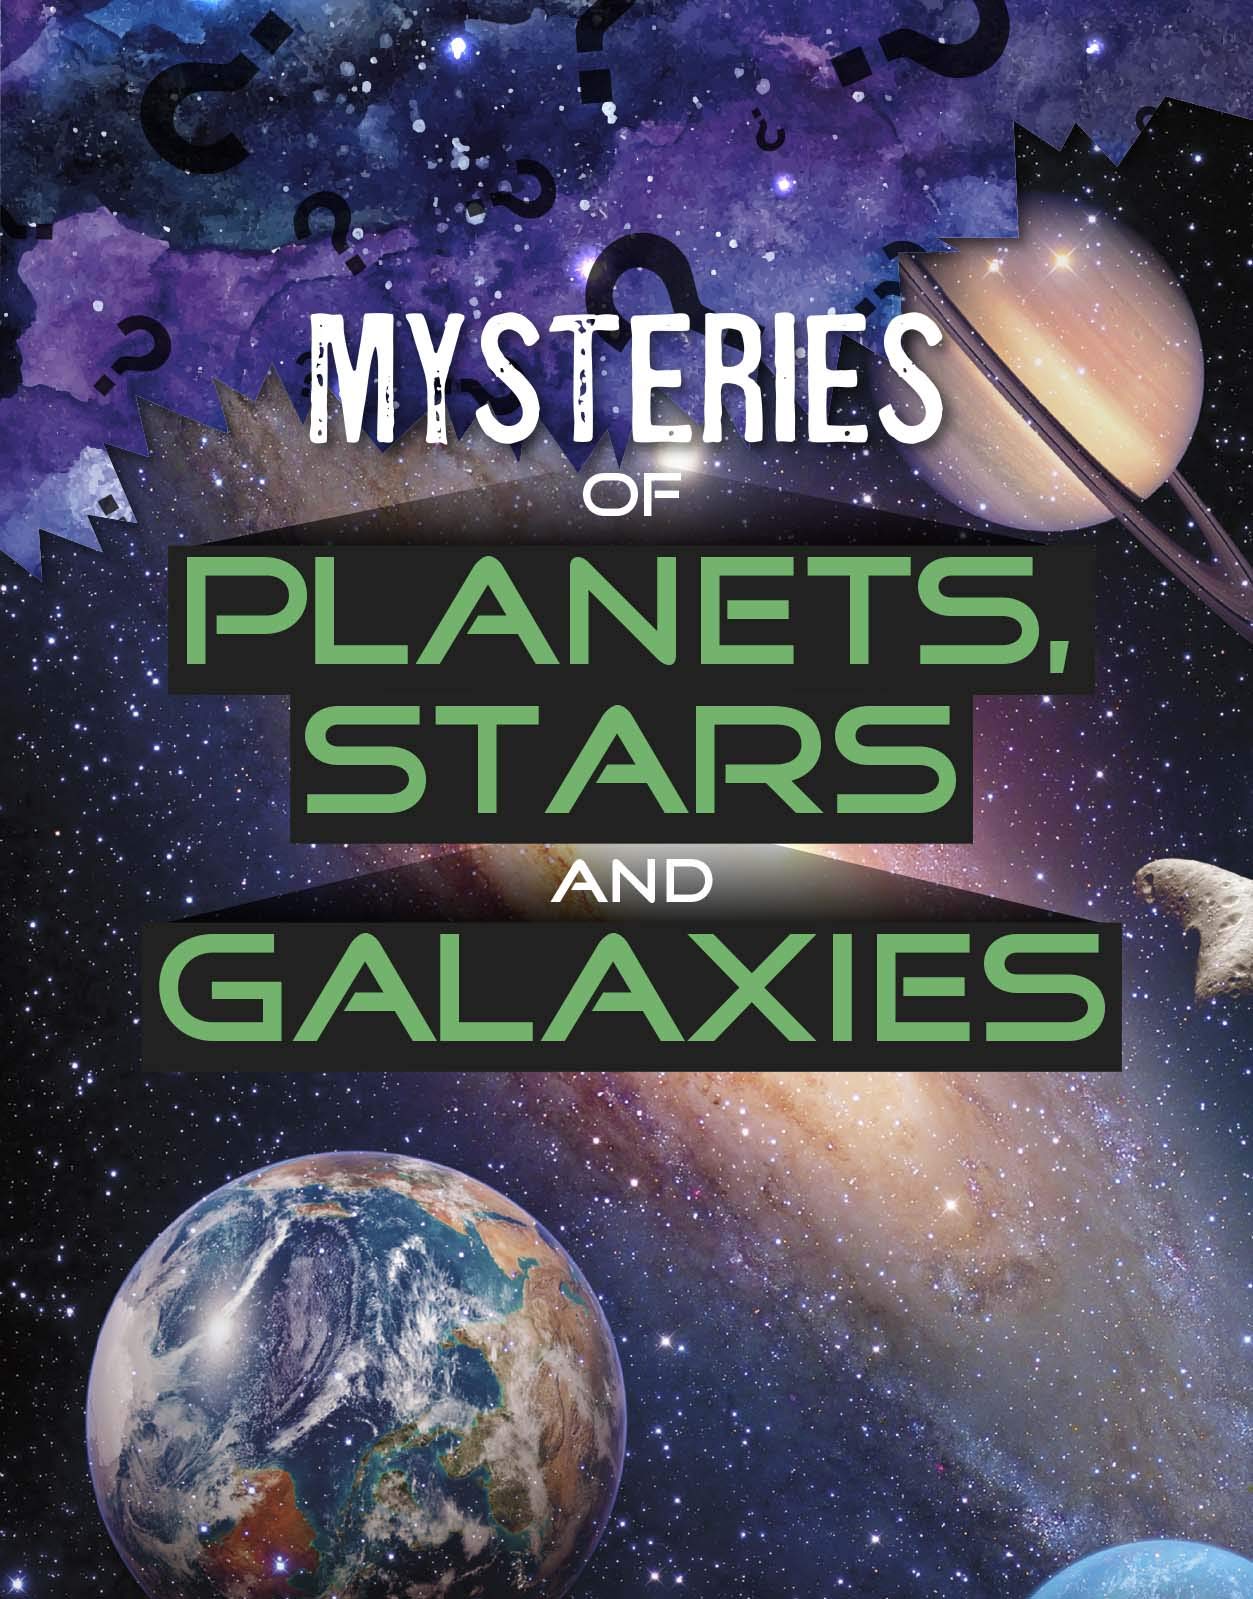 Mysteries of Planets, Stars and Galaxies